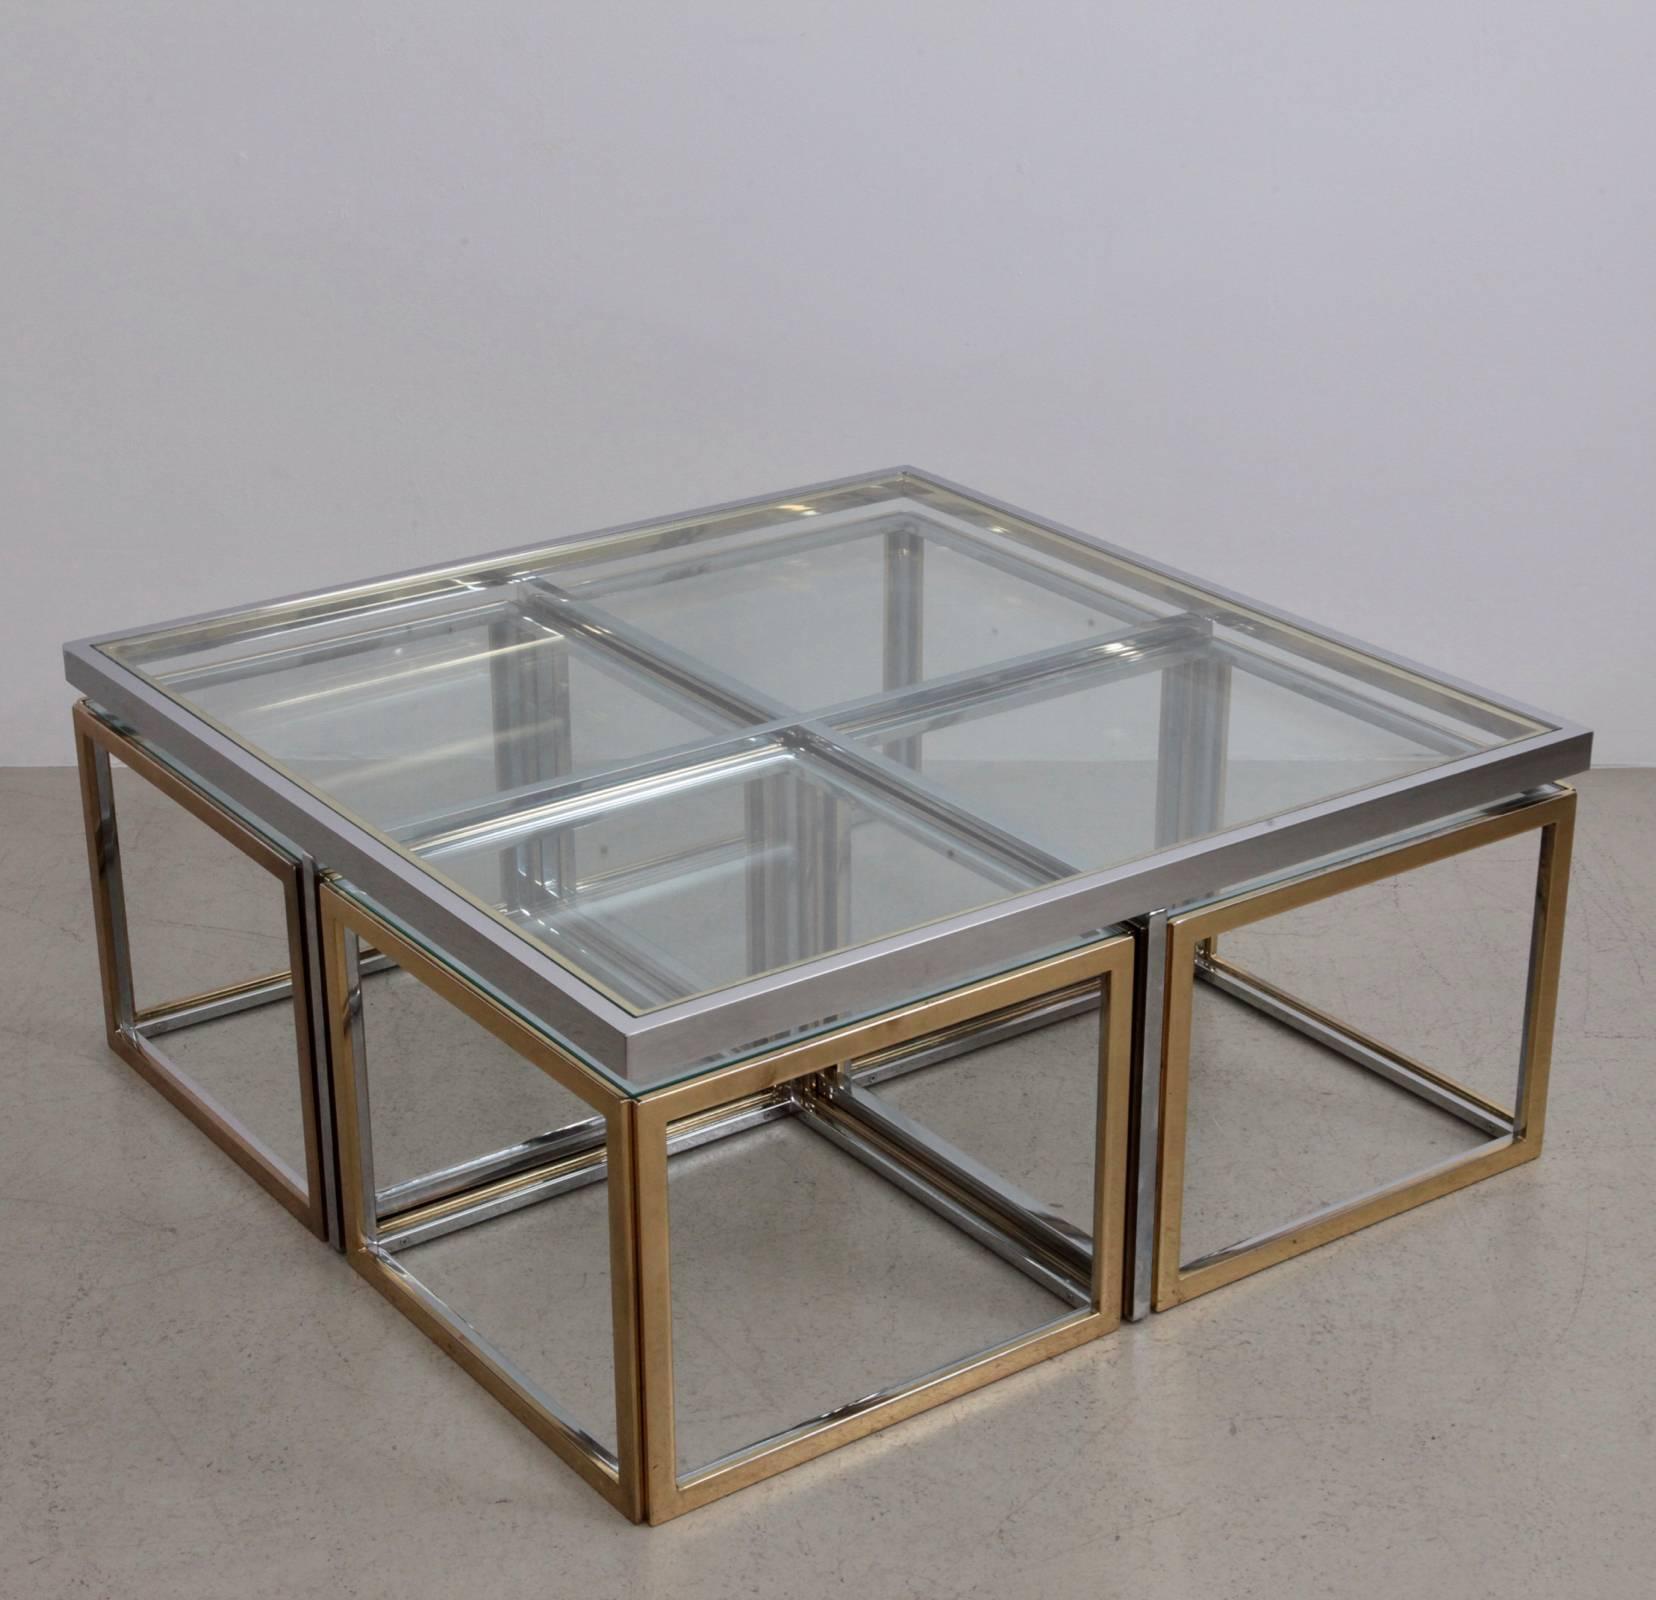 Beautiful coffee table with four nesting tables in brass and chrome by Maison Charles. The glass plates are loosely inserted to create the table surfaces. The table is in very good condition.

